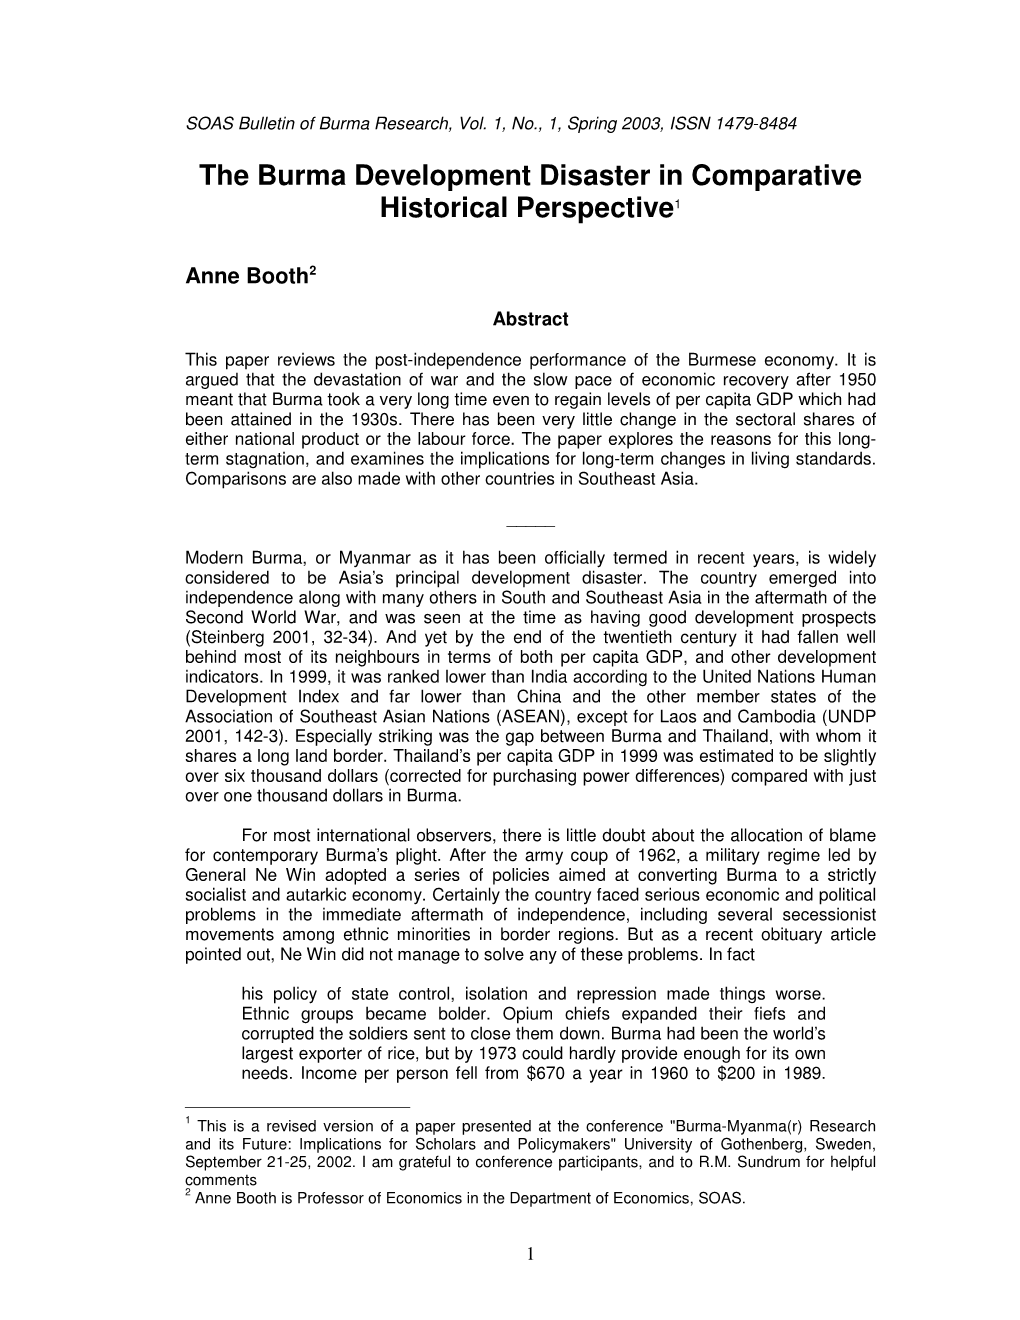 The Burma Development Disaster in Comparative Historical Perspective1